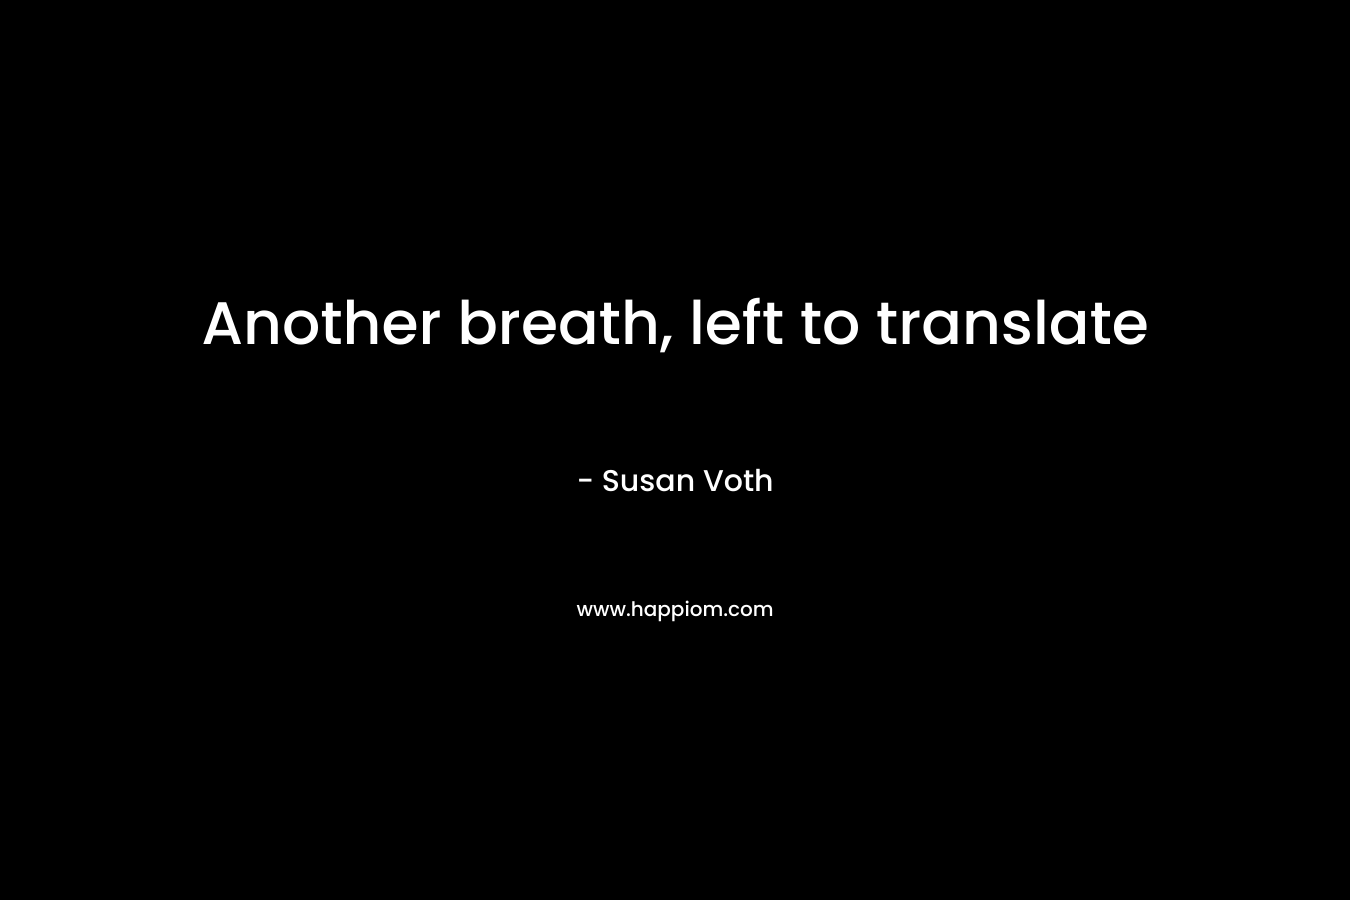 Another breath, left to translate